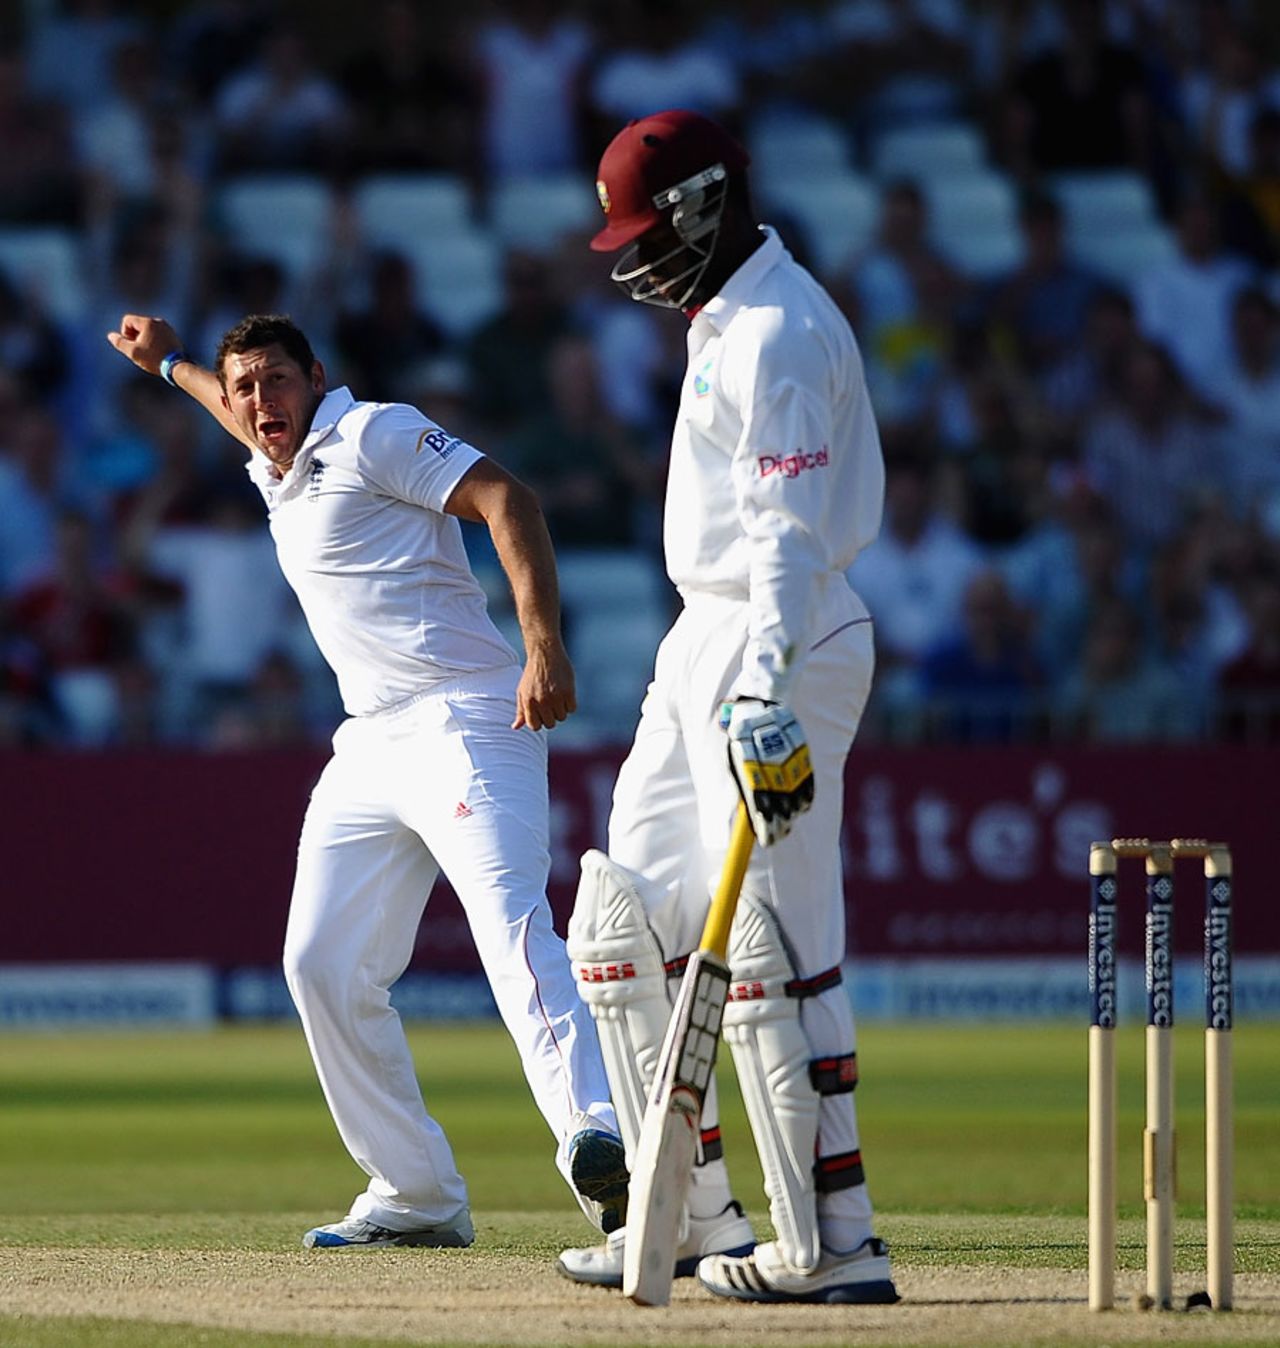 Tim Bresnan took late wickets with reverse swing, England v West Indies, 2nd Test, Trent Bridge, 3rd day, May 27, 2012